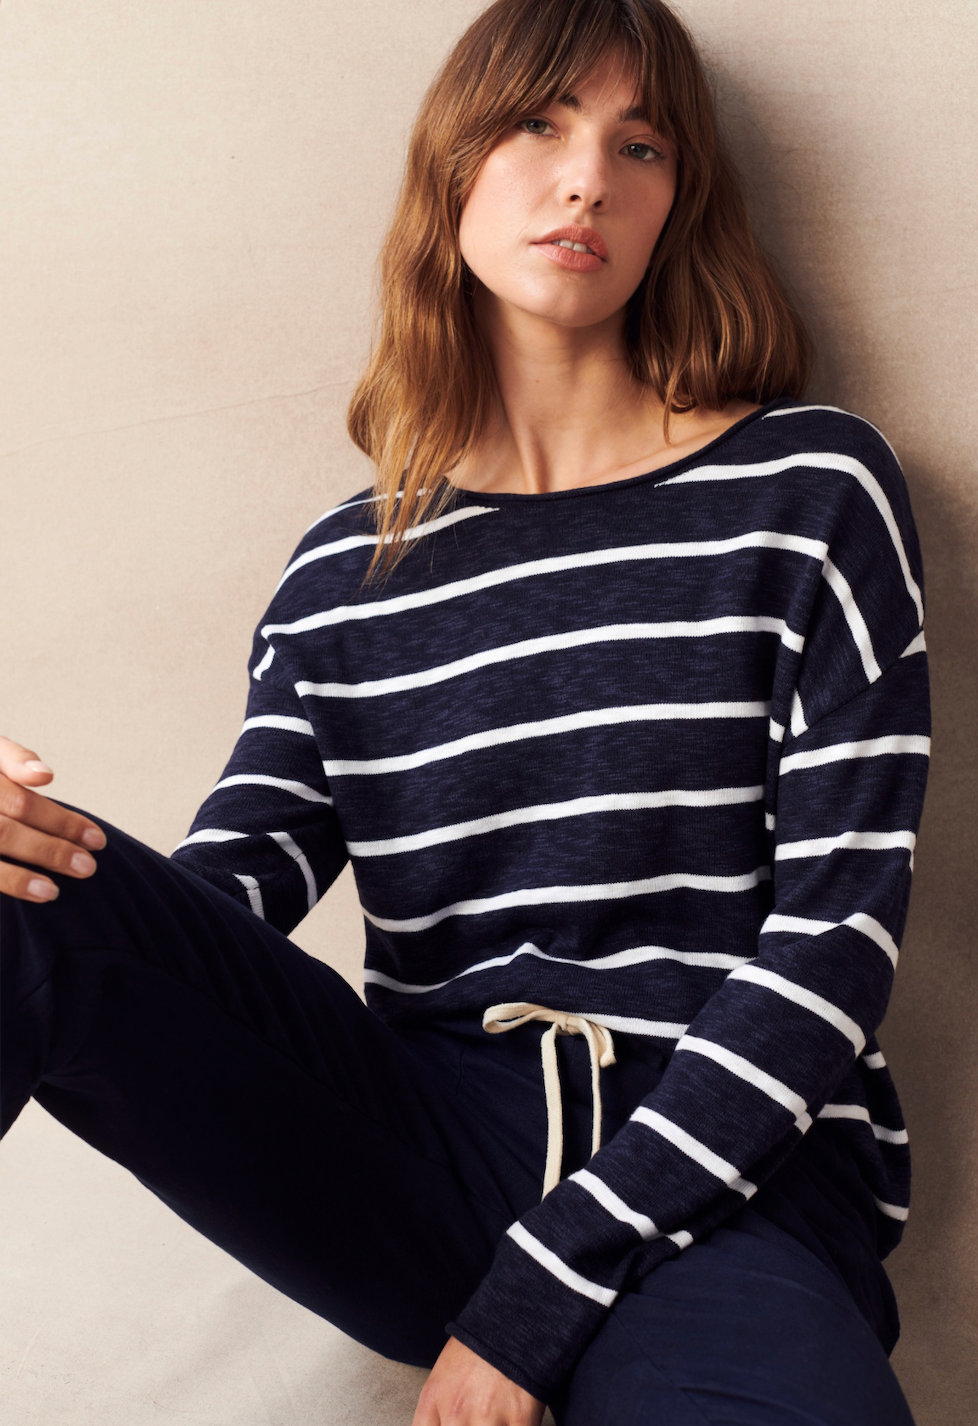 minnie top by little lies is a soft cotton blend long sleeve navy and white stripe top